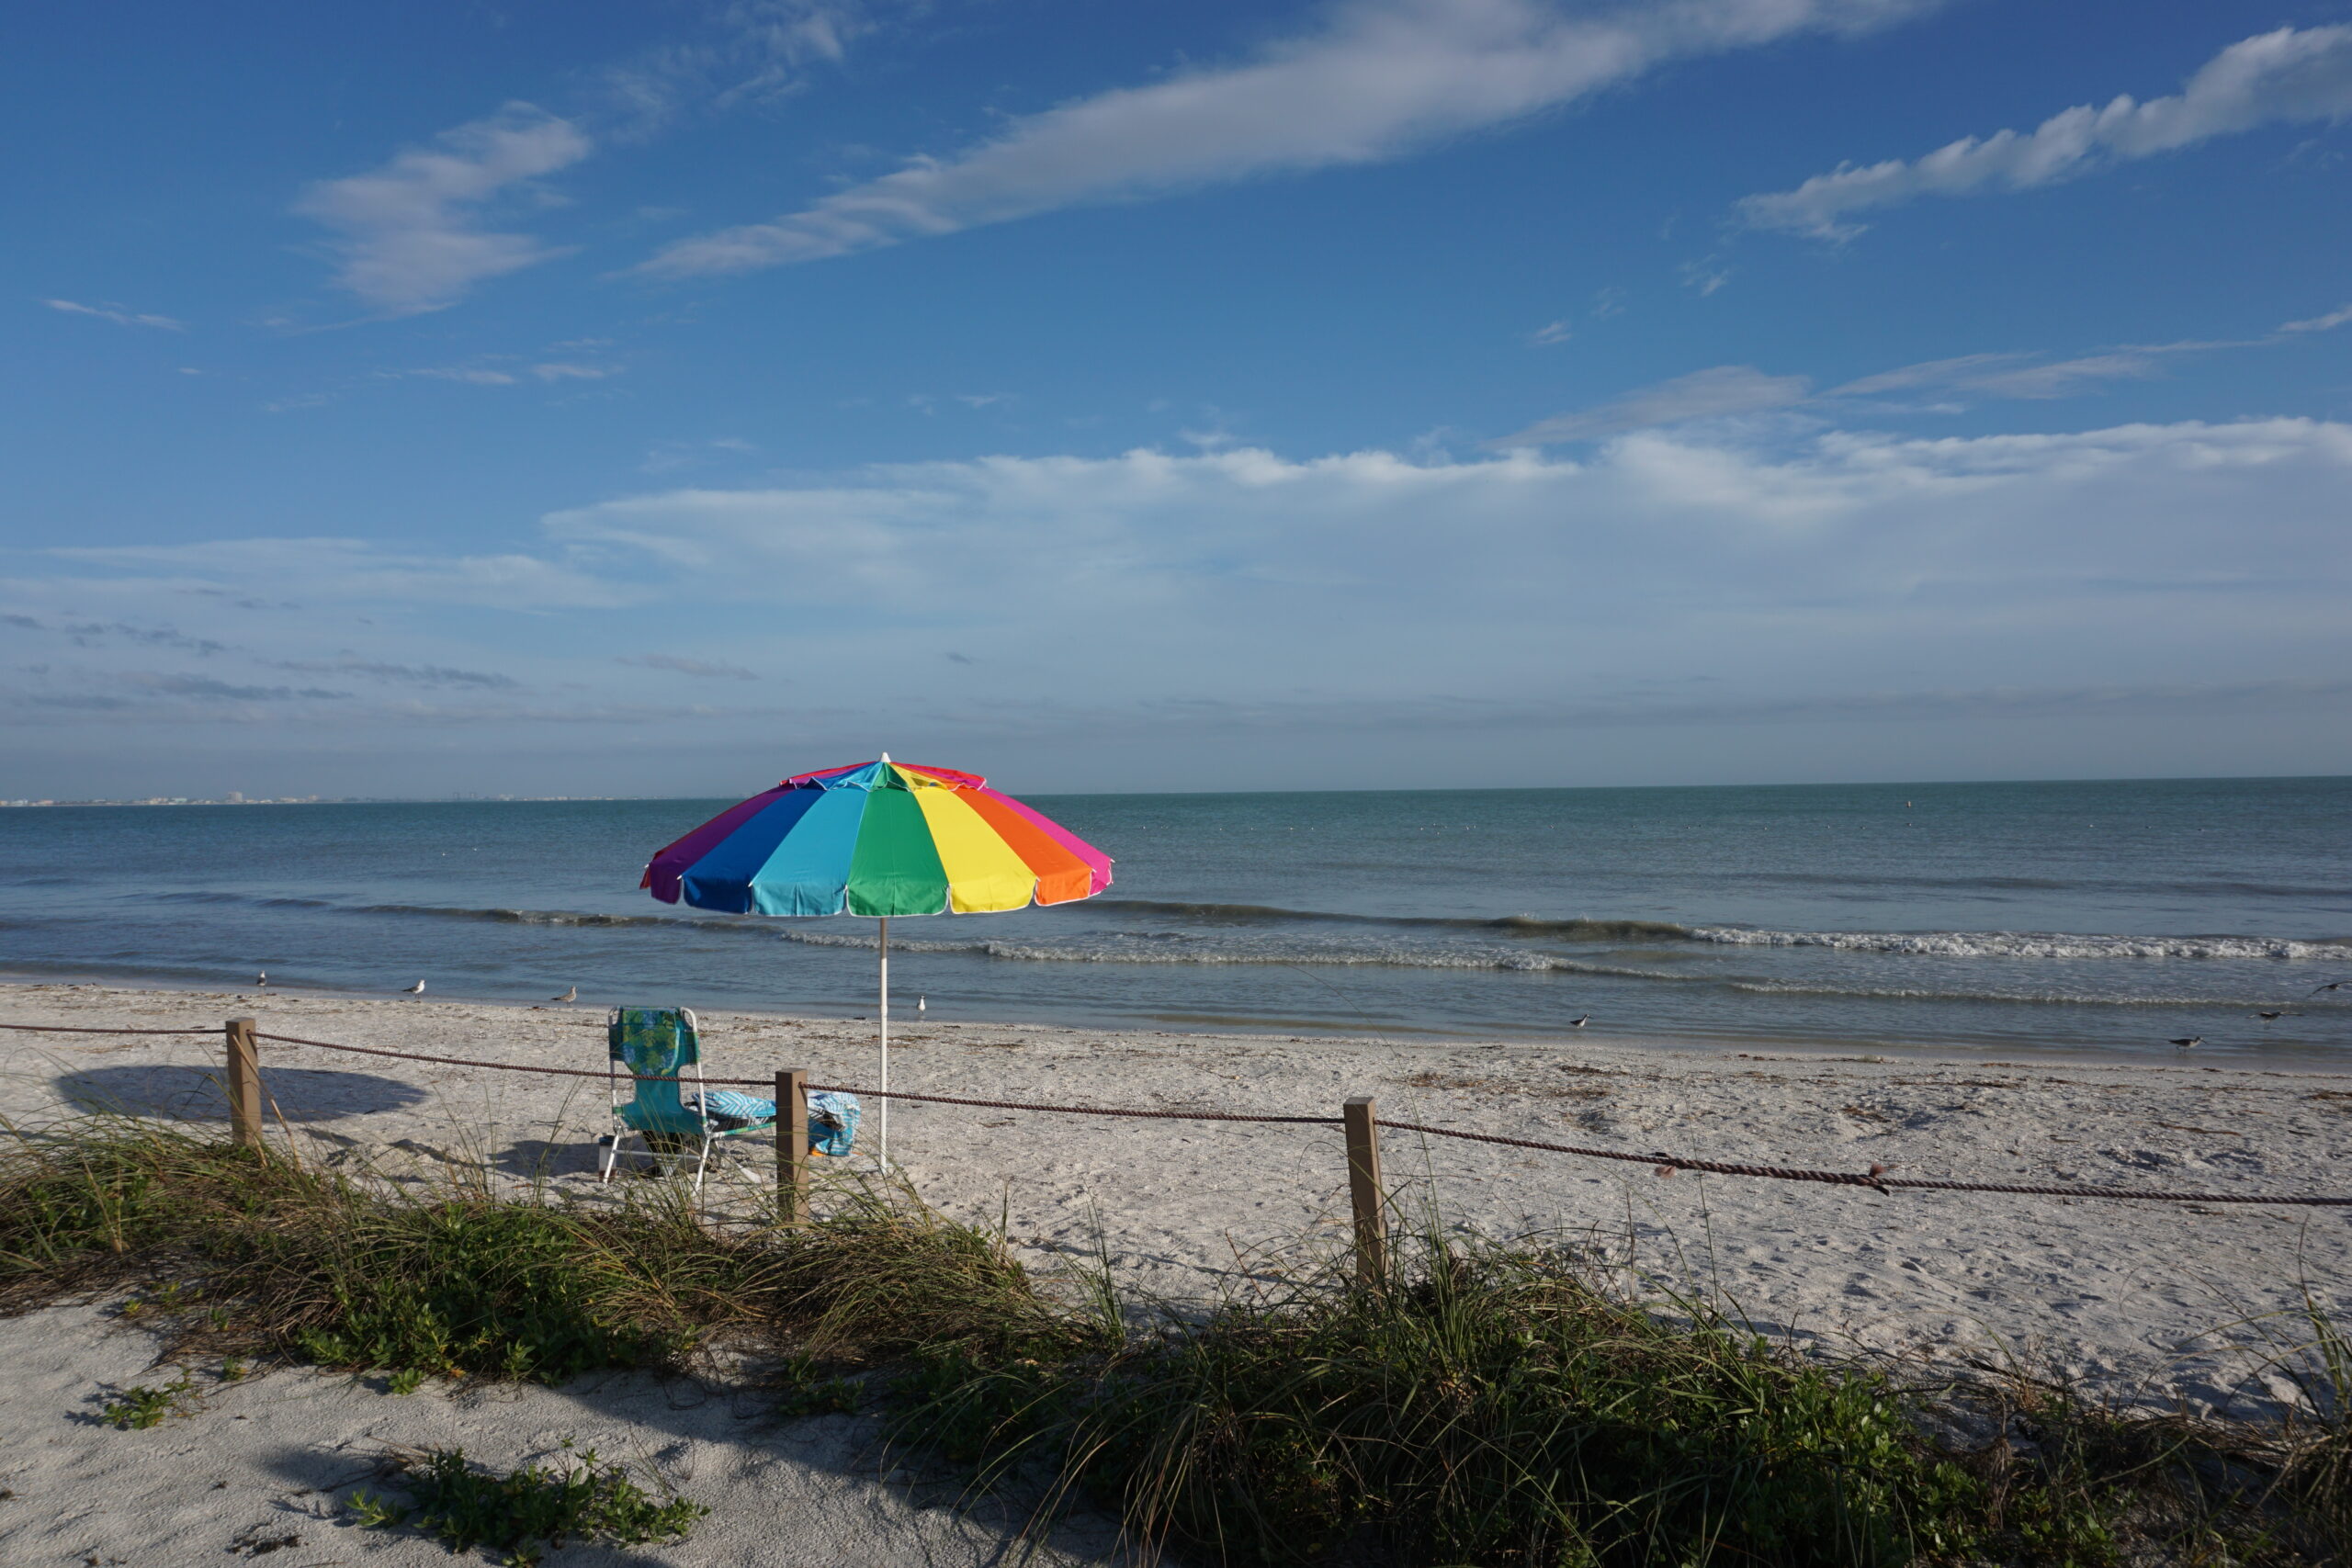 Trip Review: Fort Myers Beach, FL